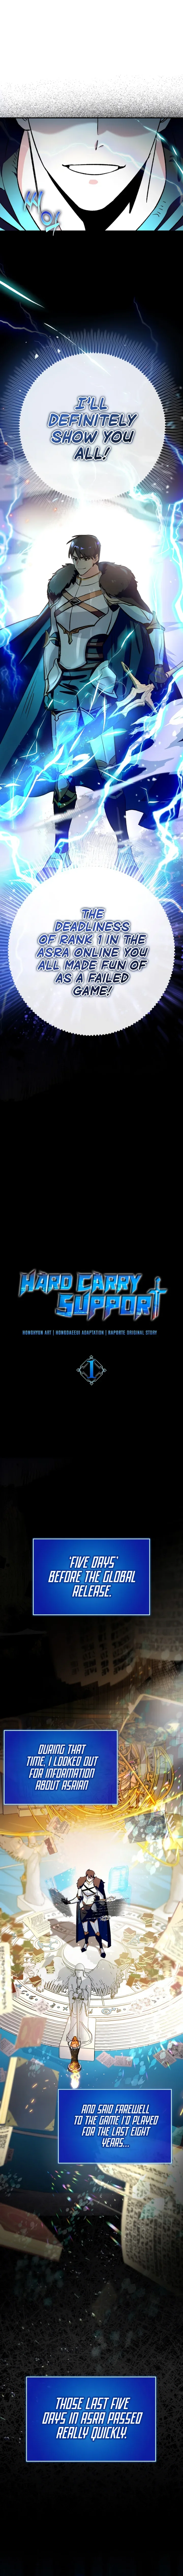 hard-carry-support-chap-1-0